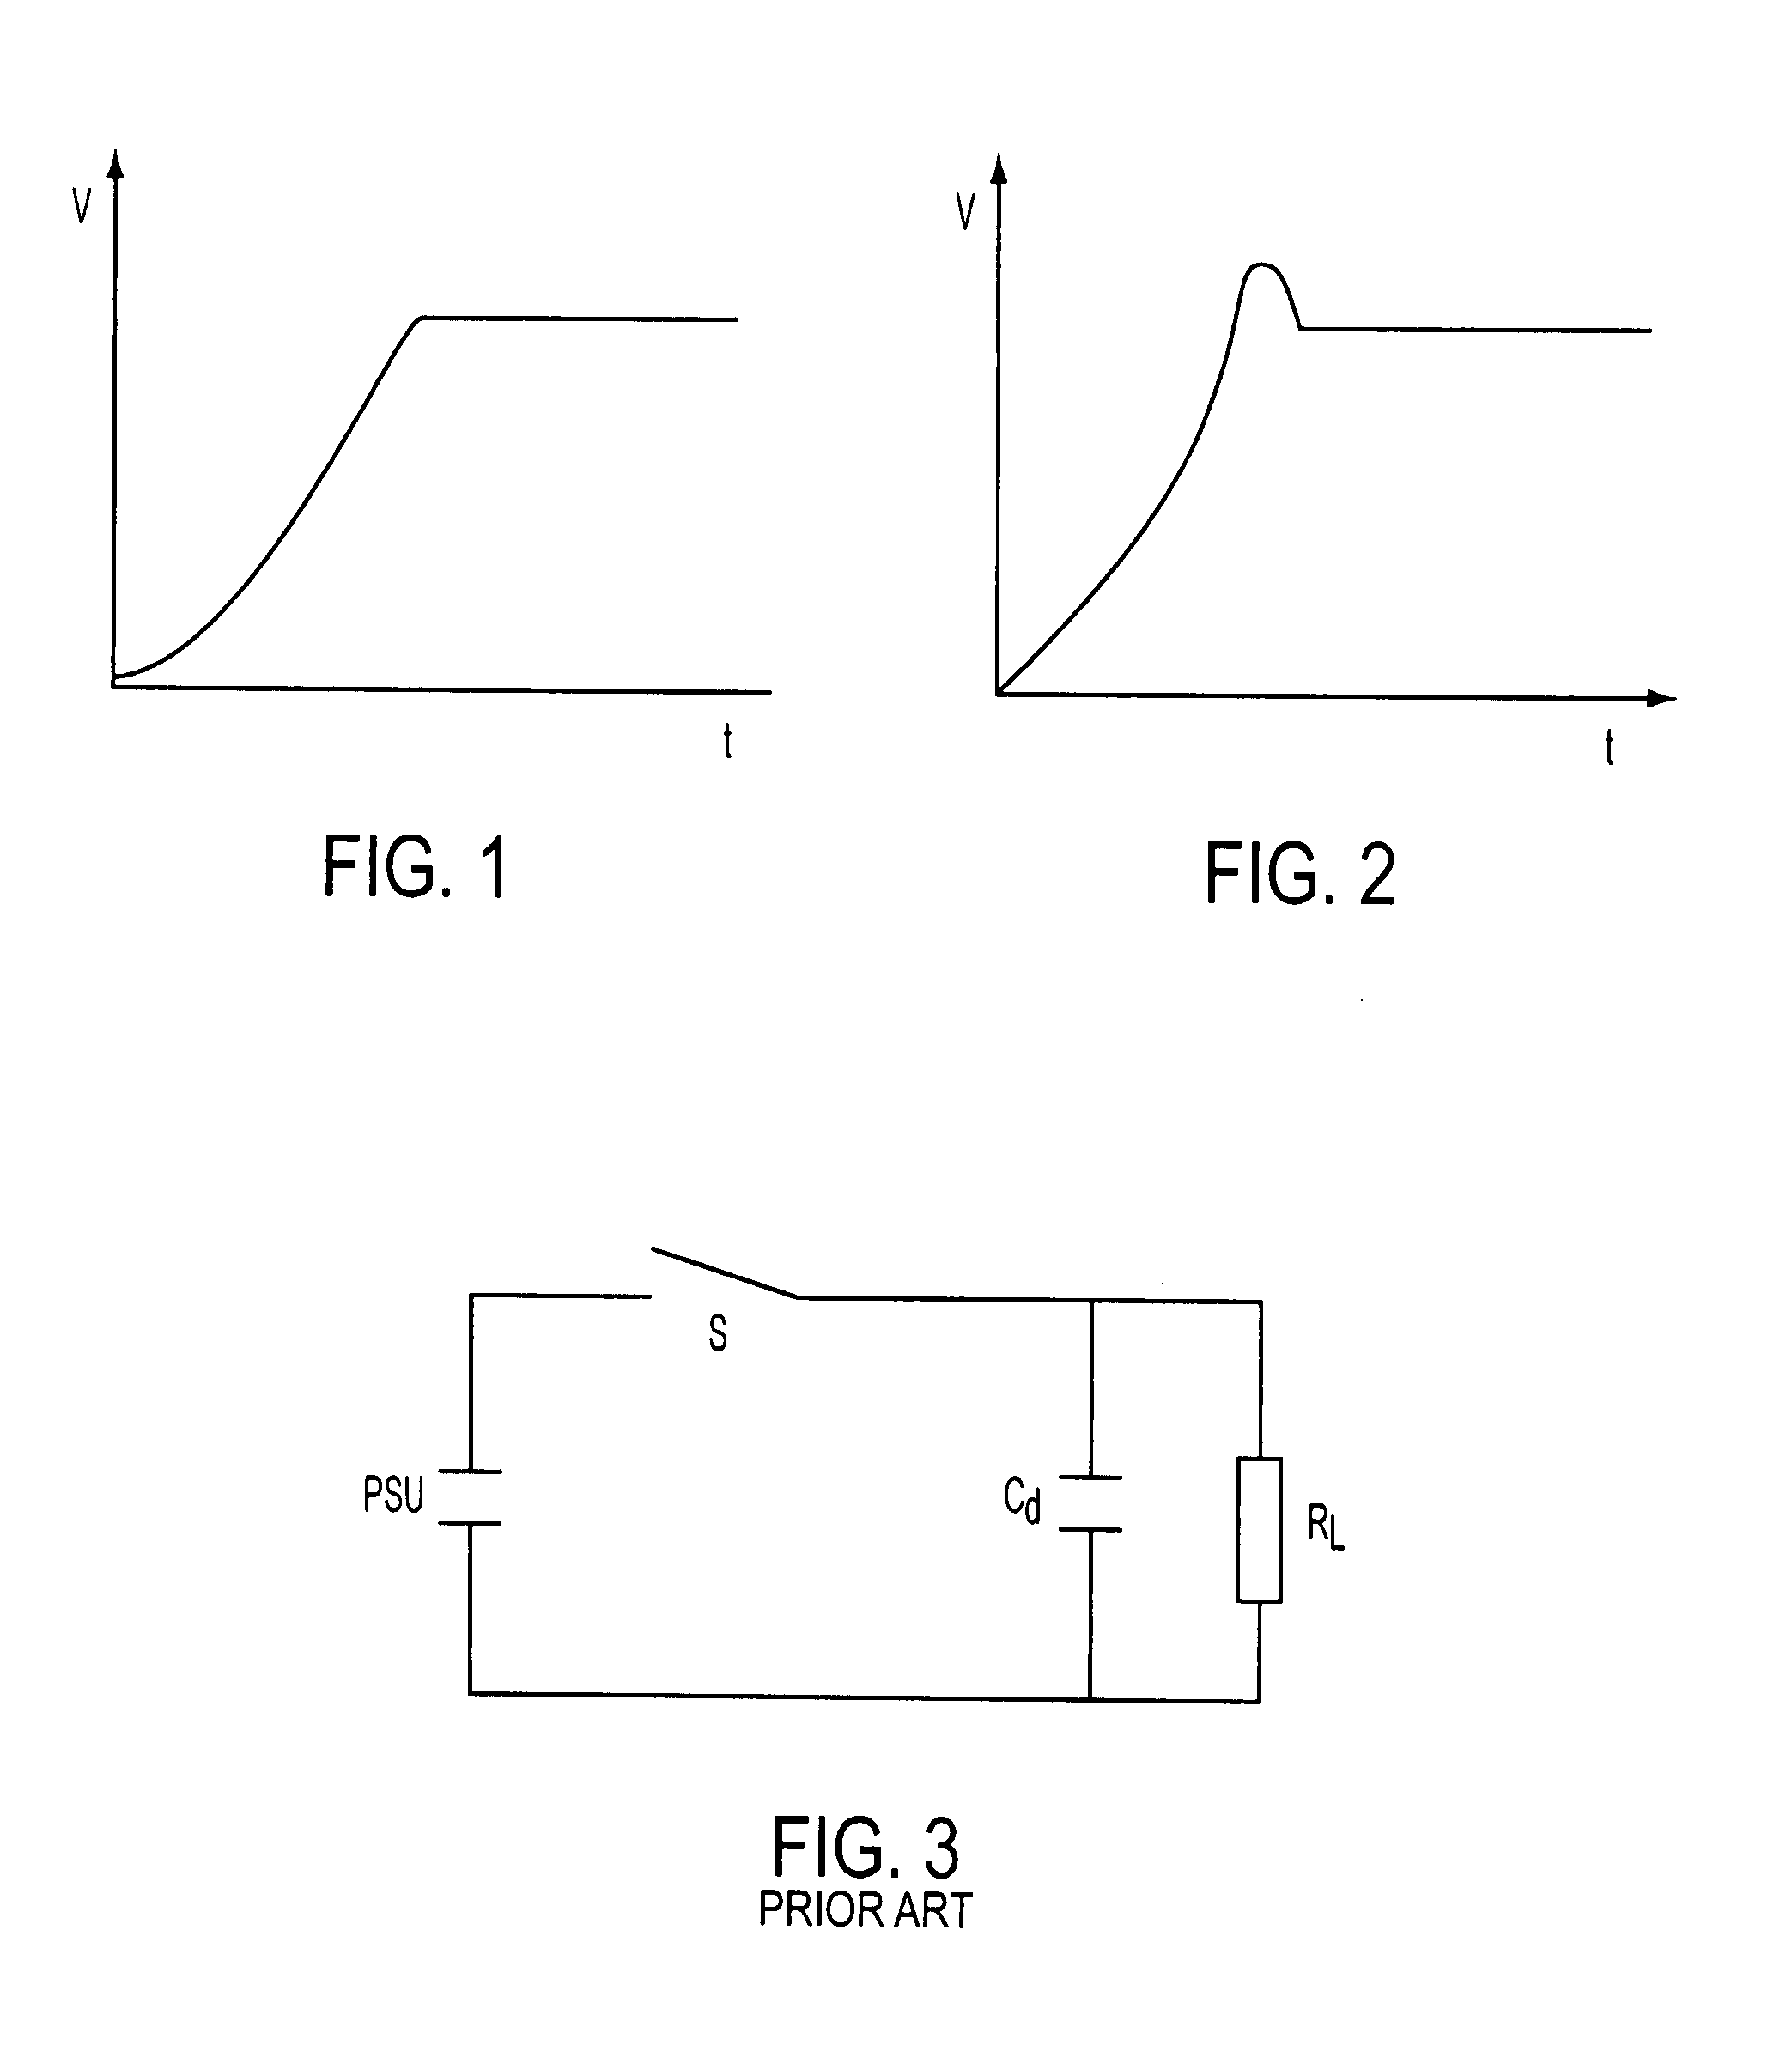 High voltage switching apparatus